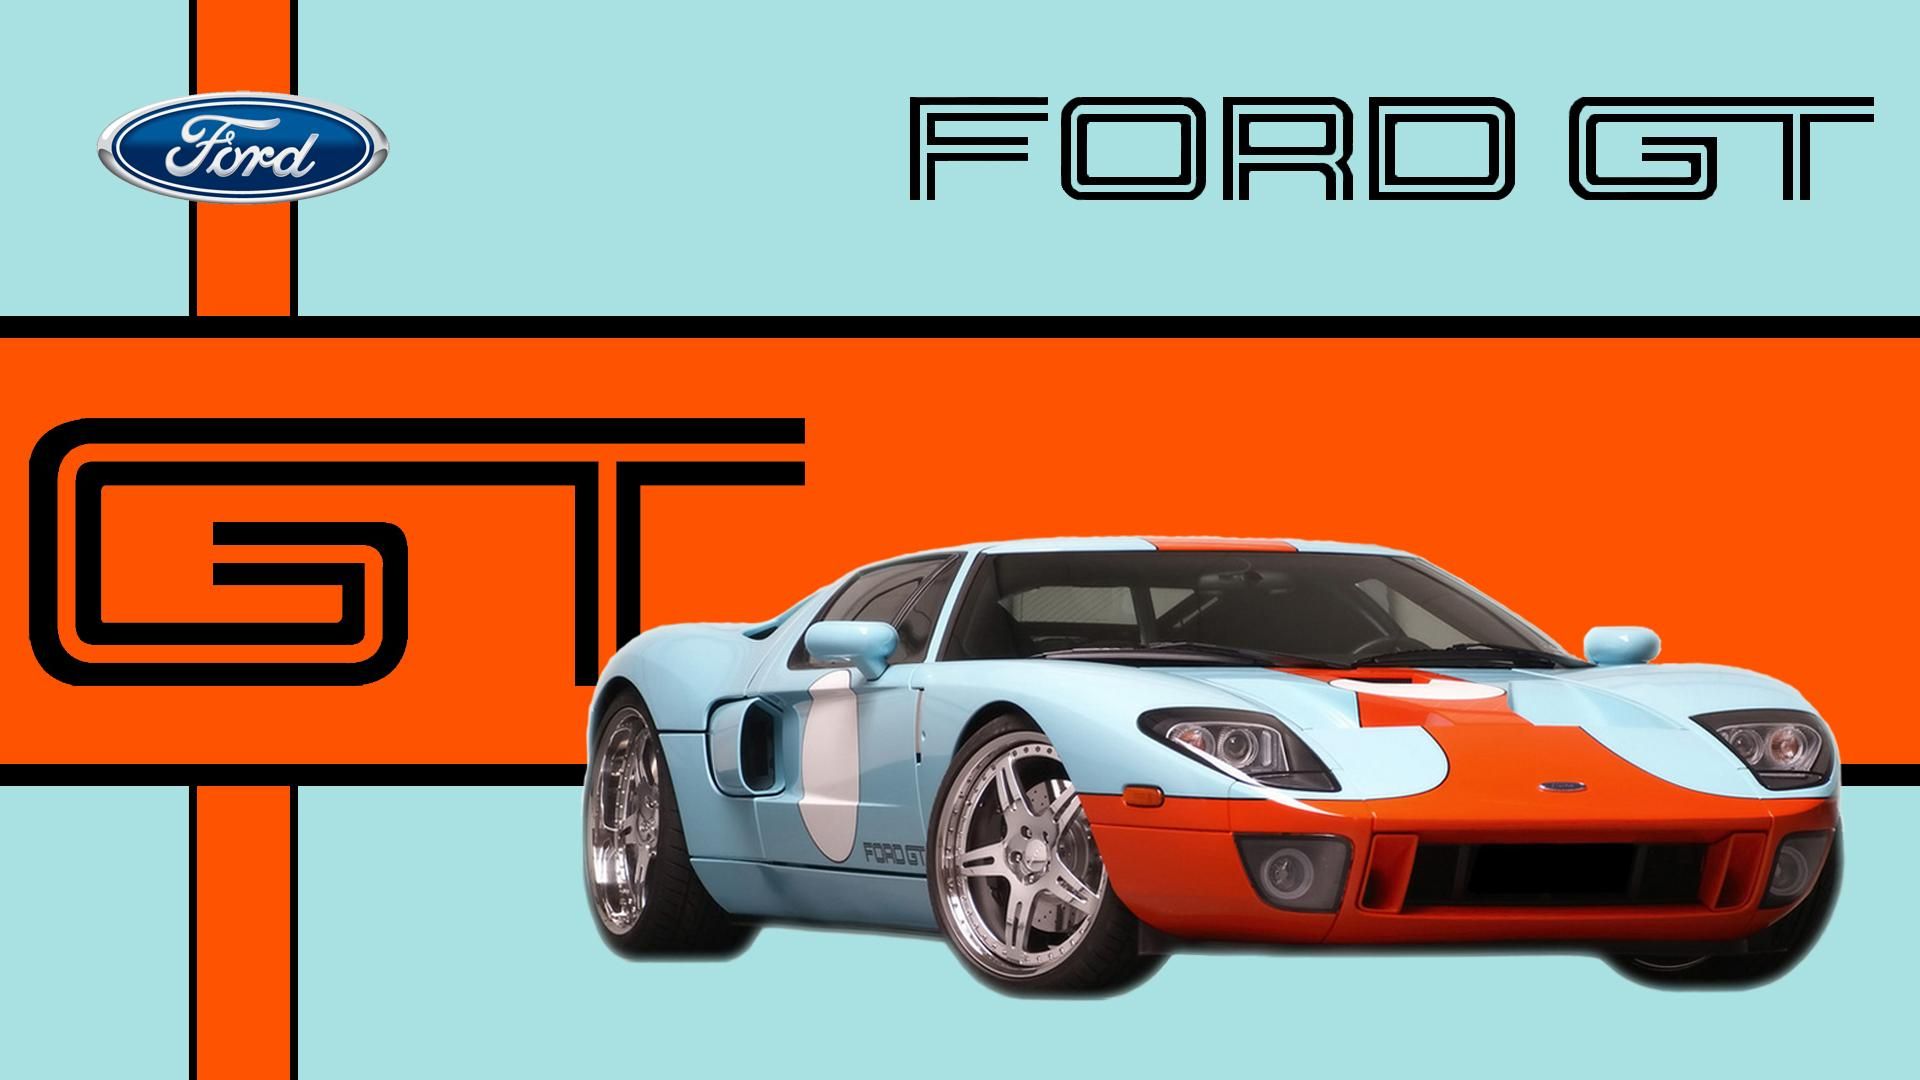 Ford Gt In Gulf Racing Livery >> HD Wallpaper, get it now!